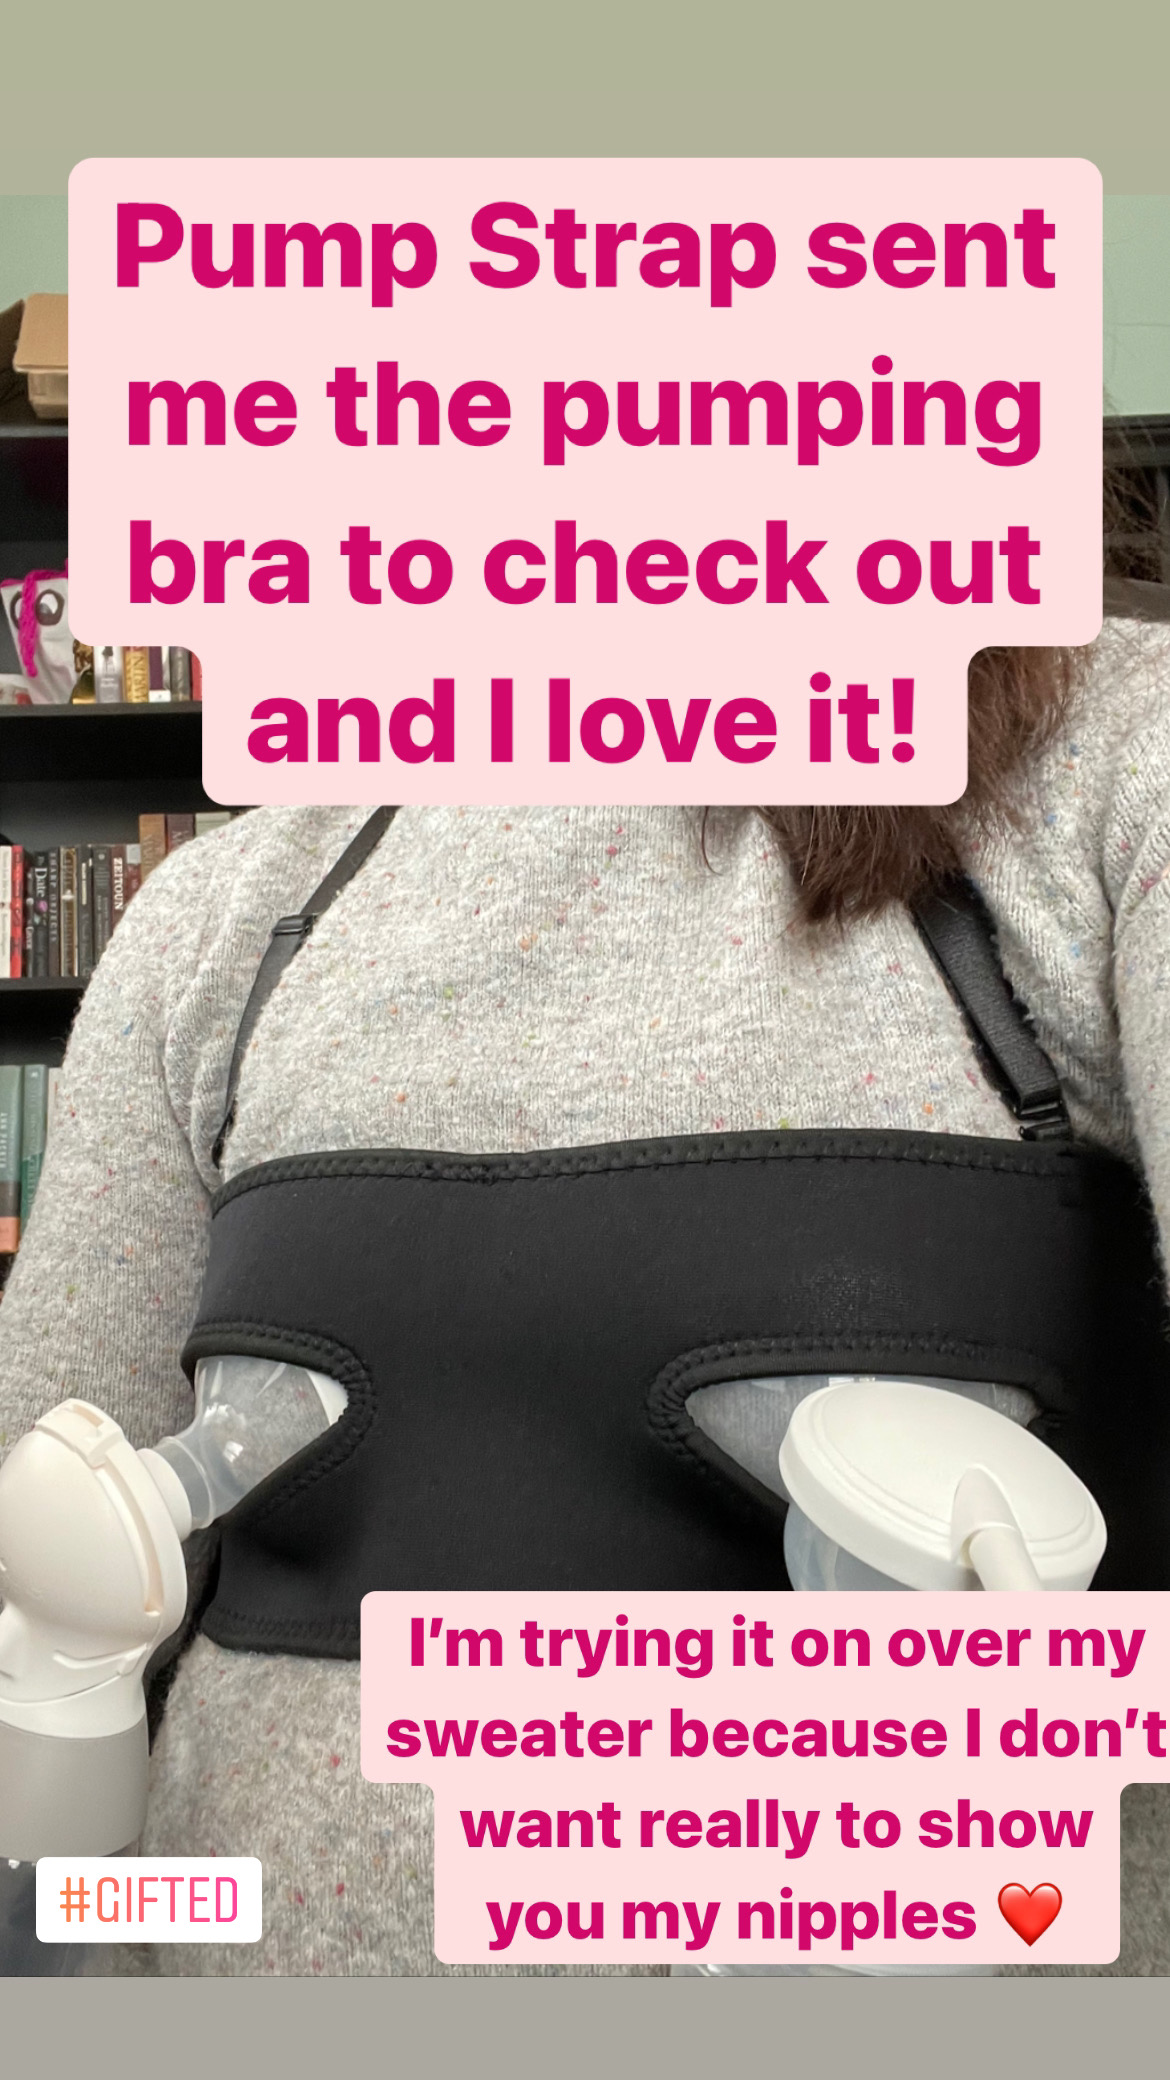 Products We Love: Lilu, Hands-Free Pumping Bra with Built-In